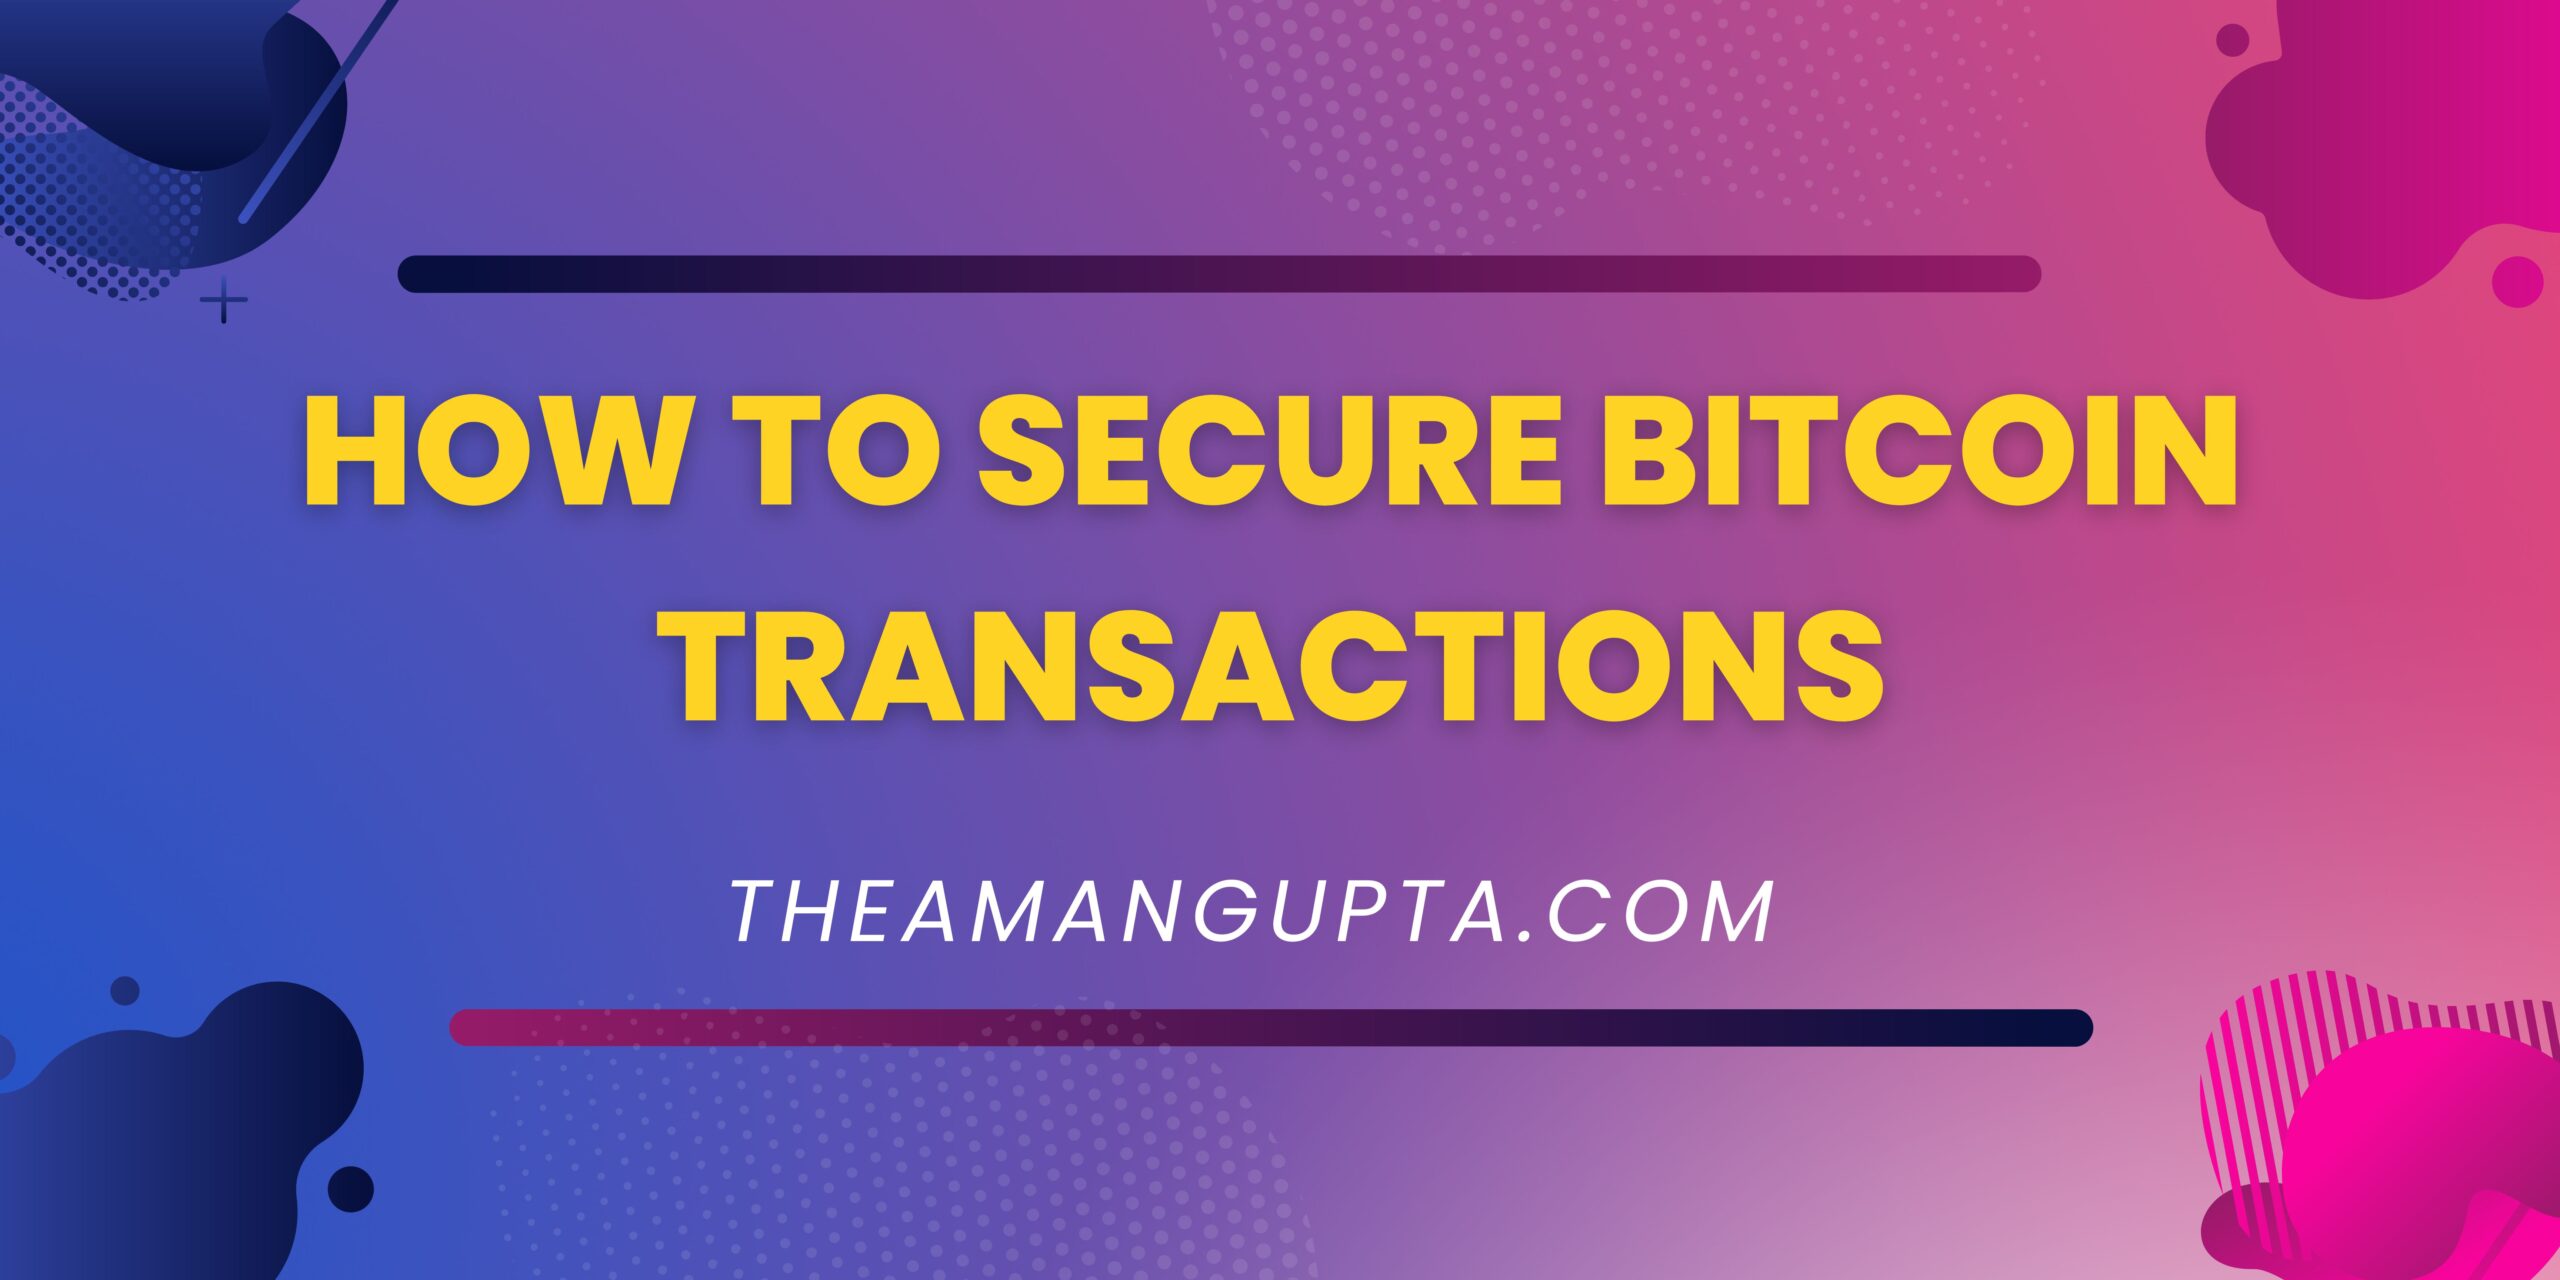 How To Secure Bitcoin Transactions|Bitcoin Transactions|Theamangupta|Theamangupta